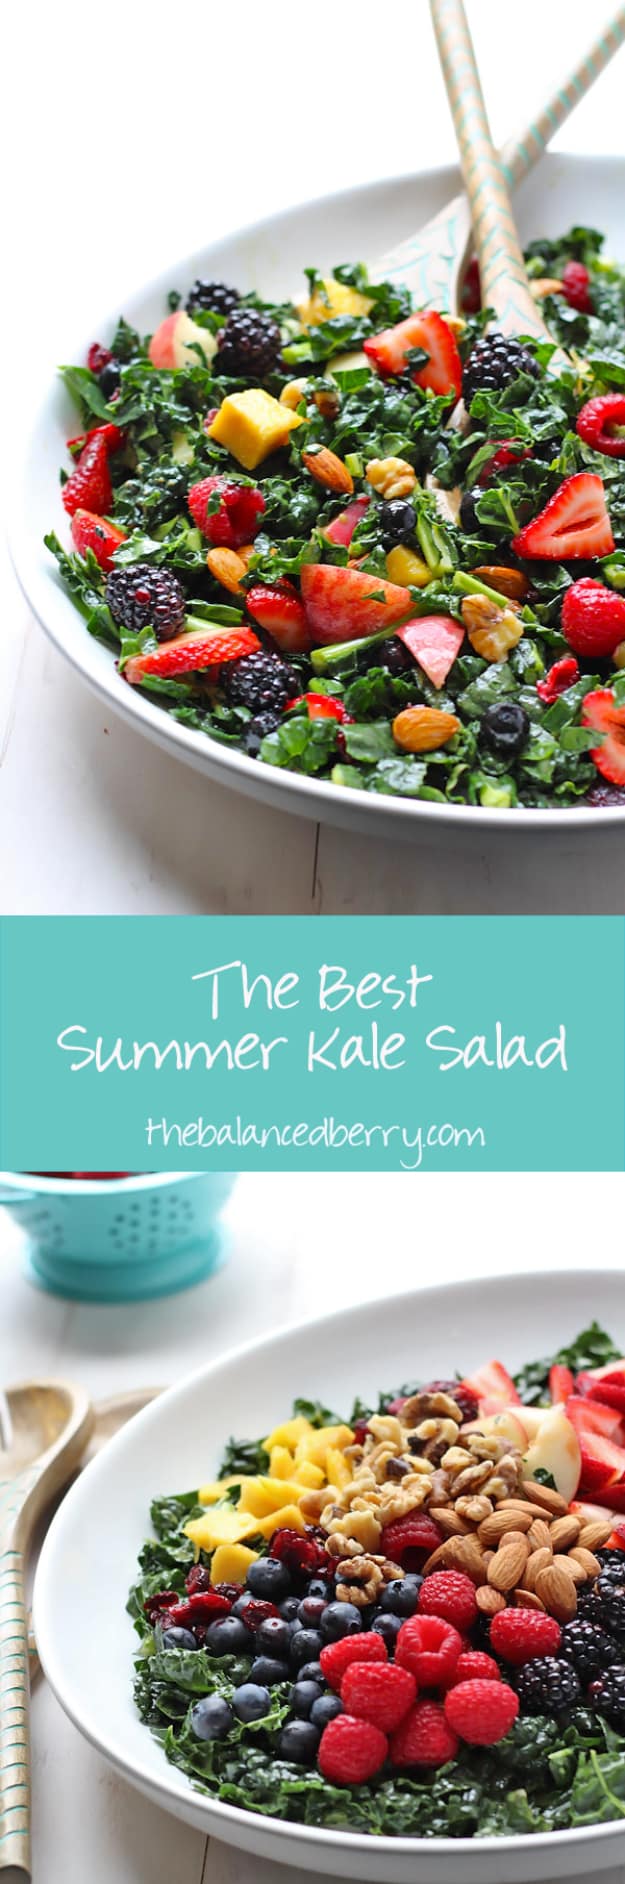 Best Recipes for a Backyard Barbecue - Kale Summer Salad - Best Cheap, Easy and Quick Recipes Ideas for Awesome Cookouts. Outdoor BBQ and Party Foods You Can Make for A Crowd 